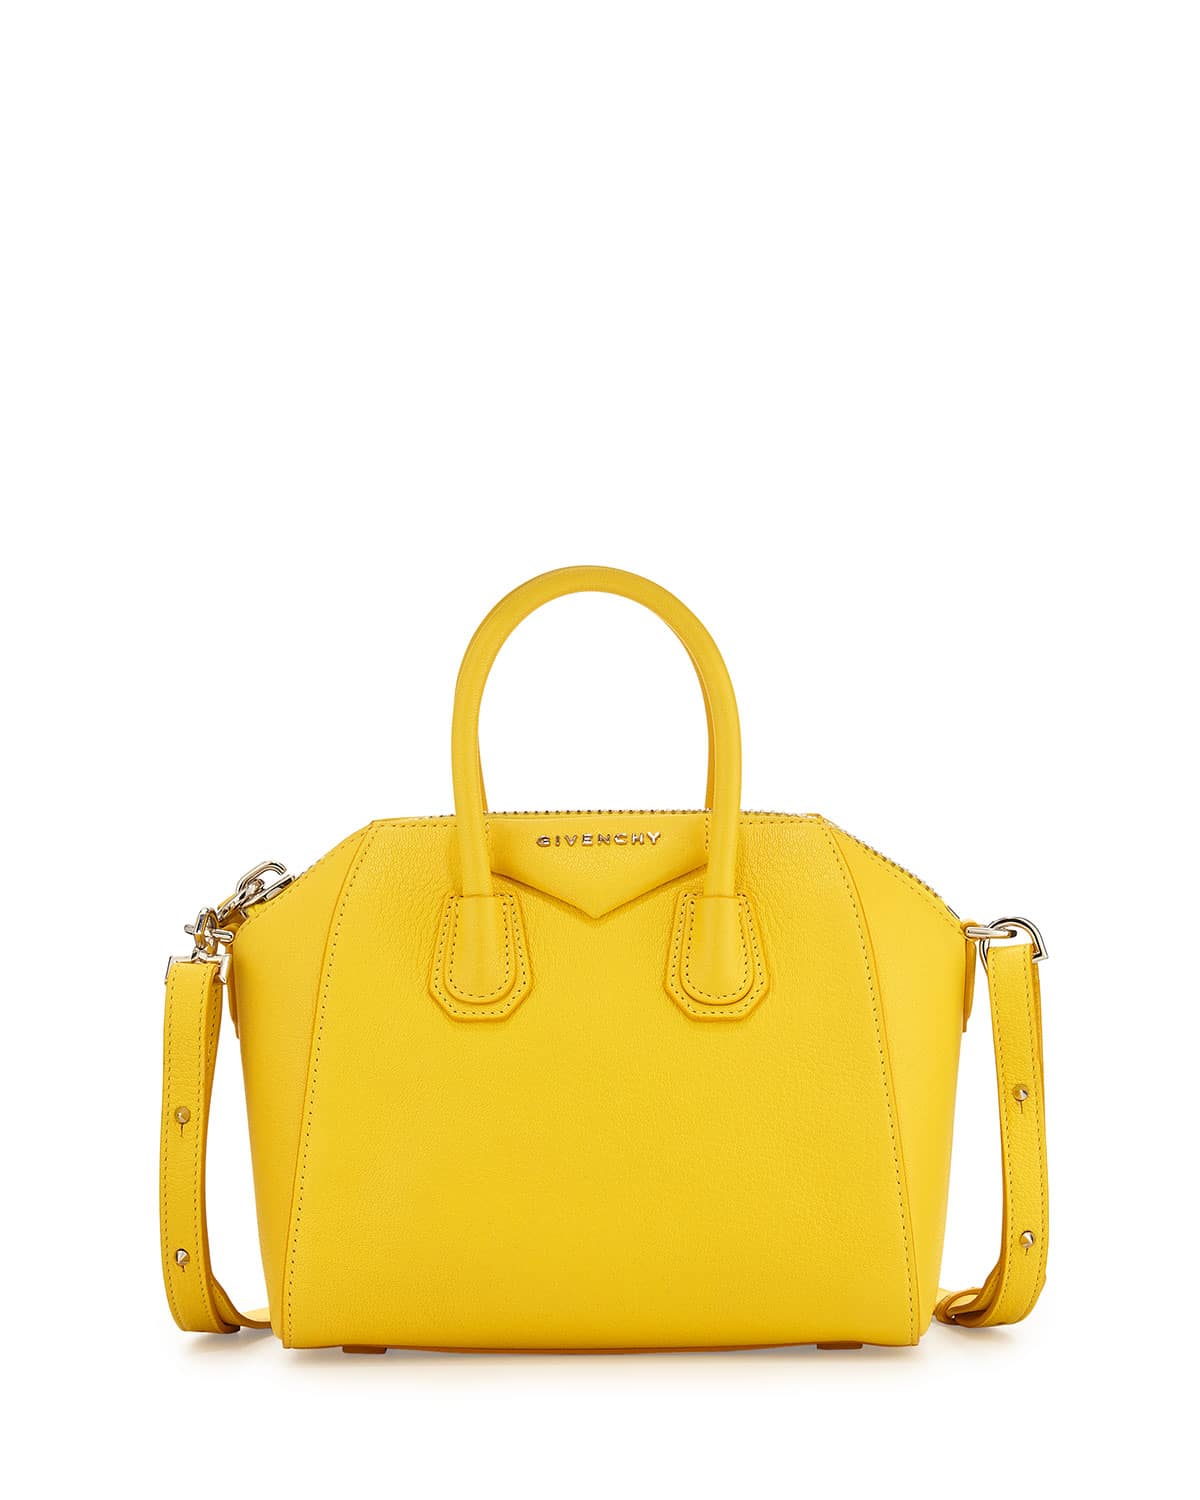 Givenchy Cruise 2015 Bag Collection with More Croc Embossed Styles | Spotted Fashion